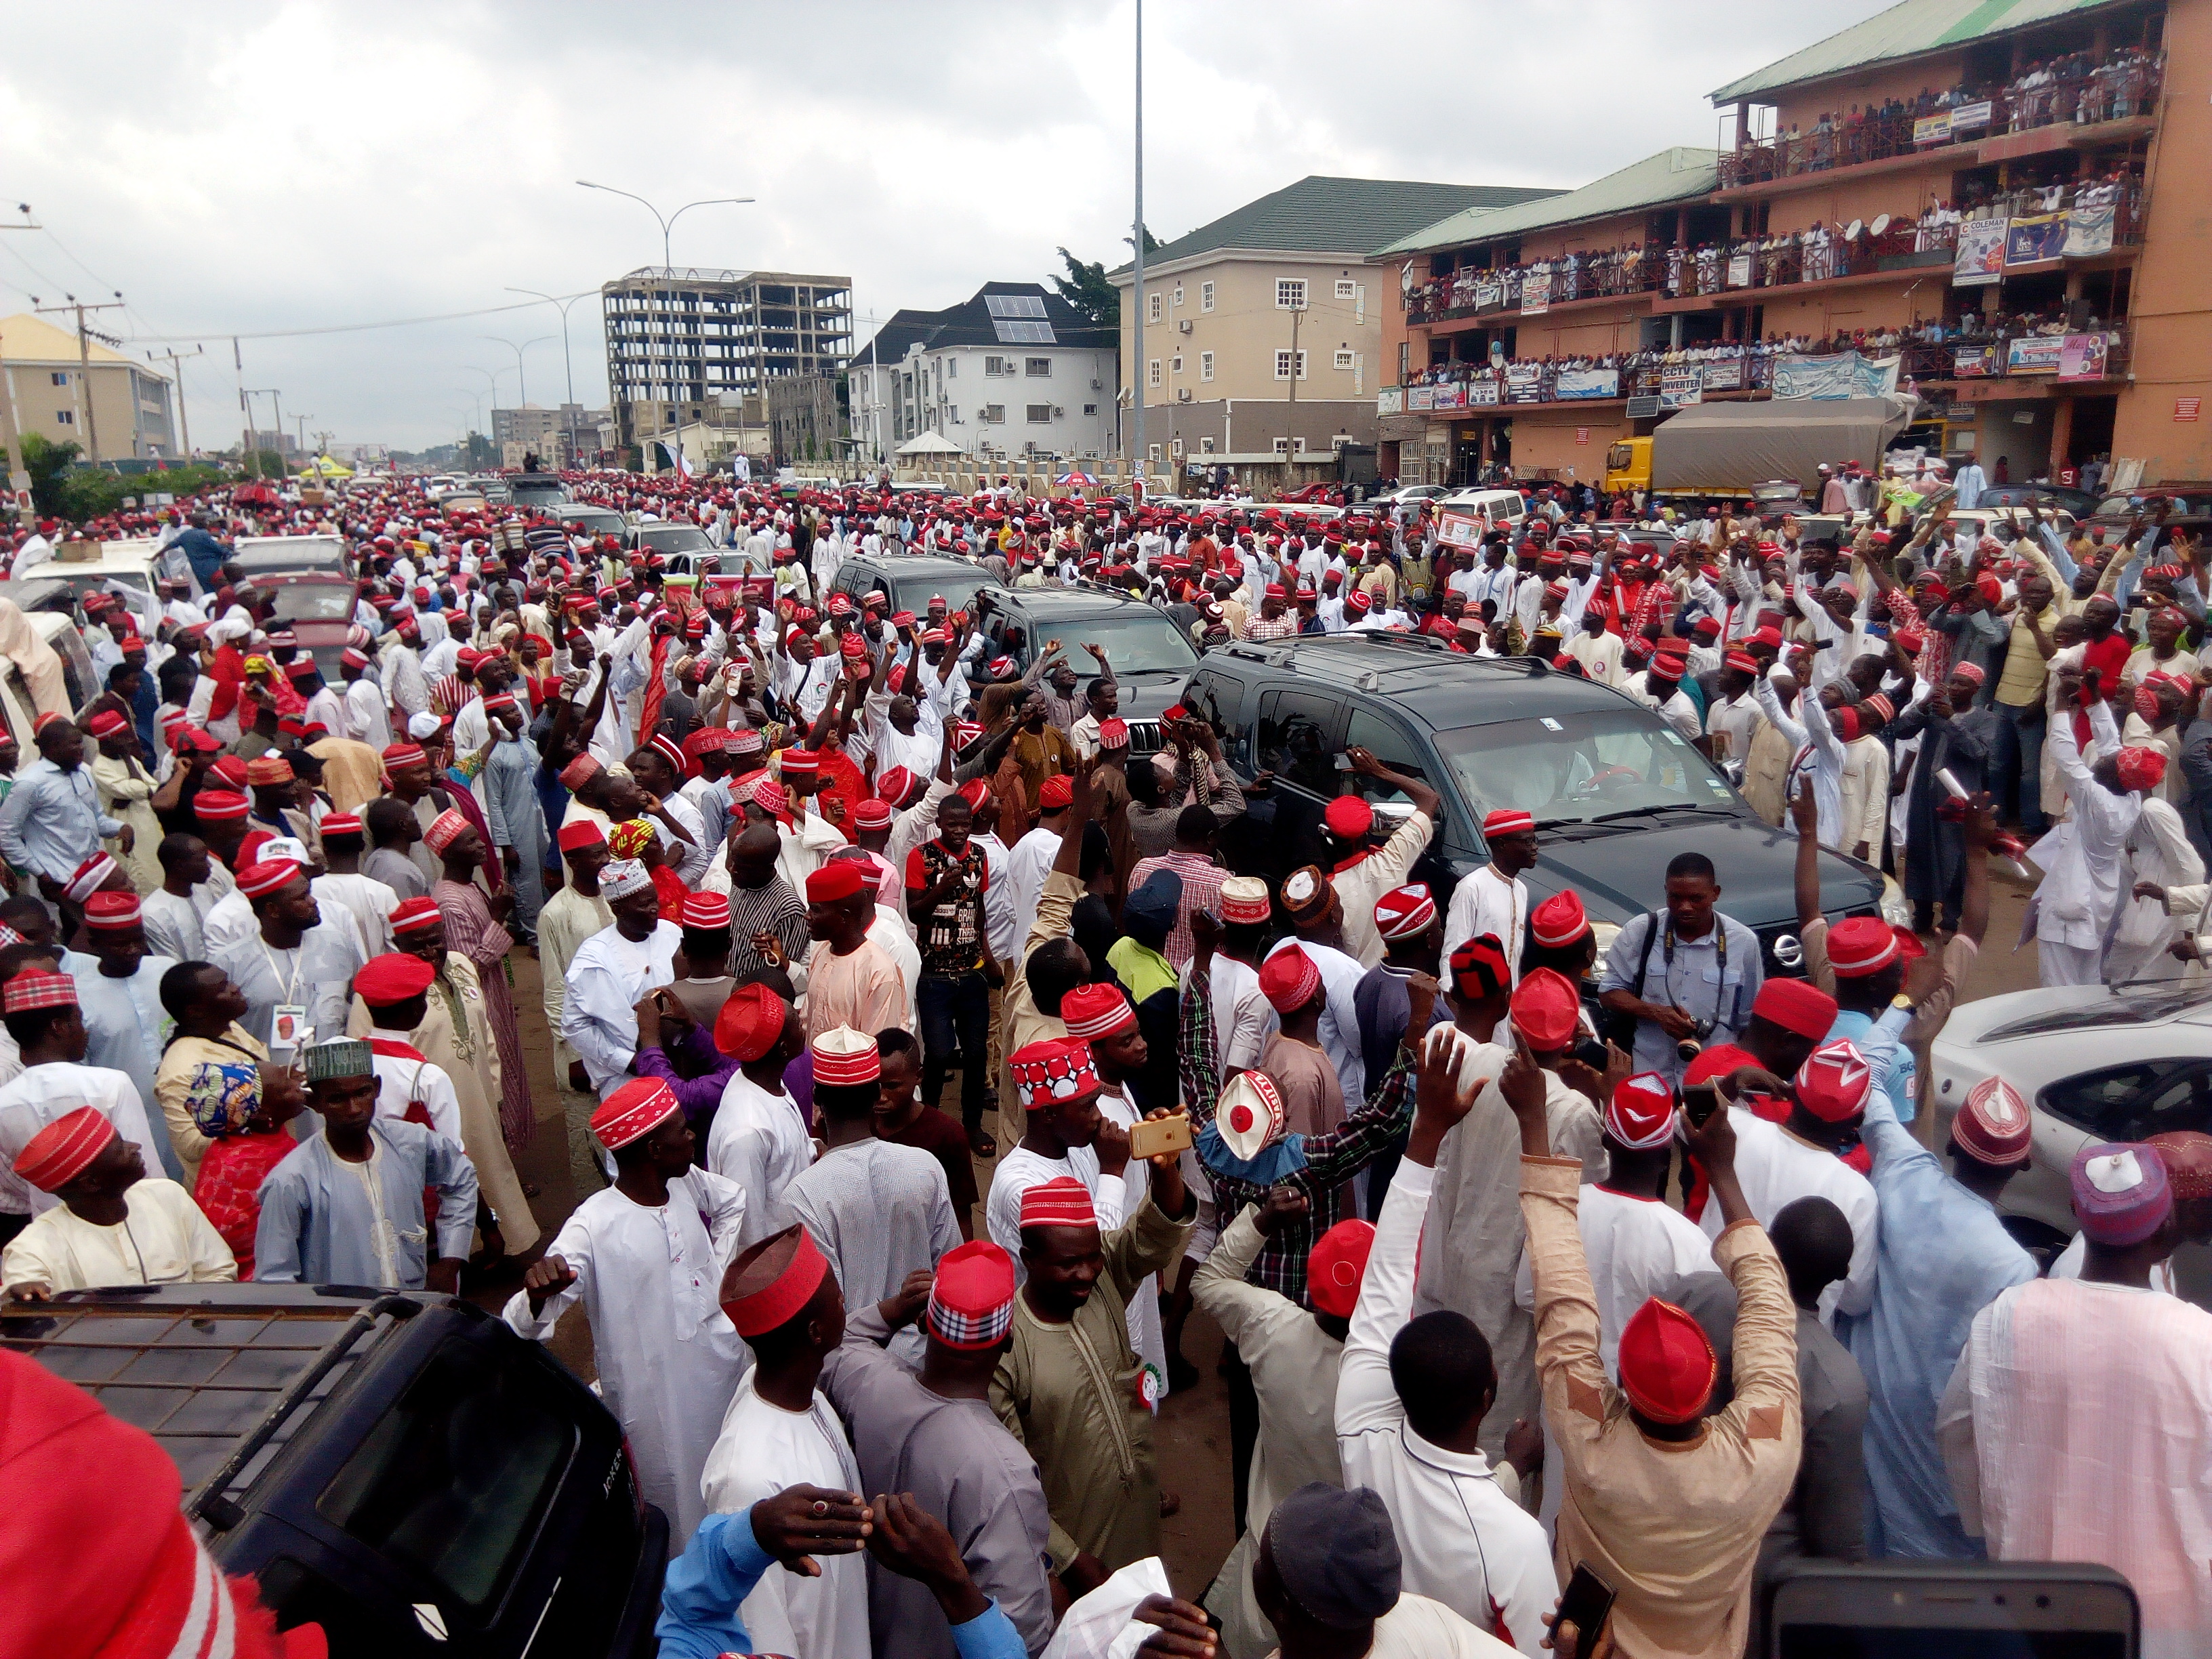 “Eagle Square belongs to all of us”, says Saraki as Kwankwaso joins presidential race